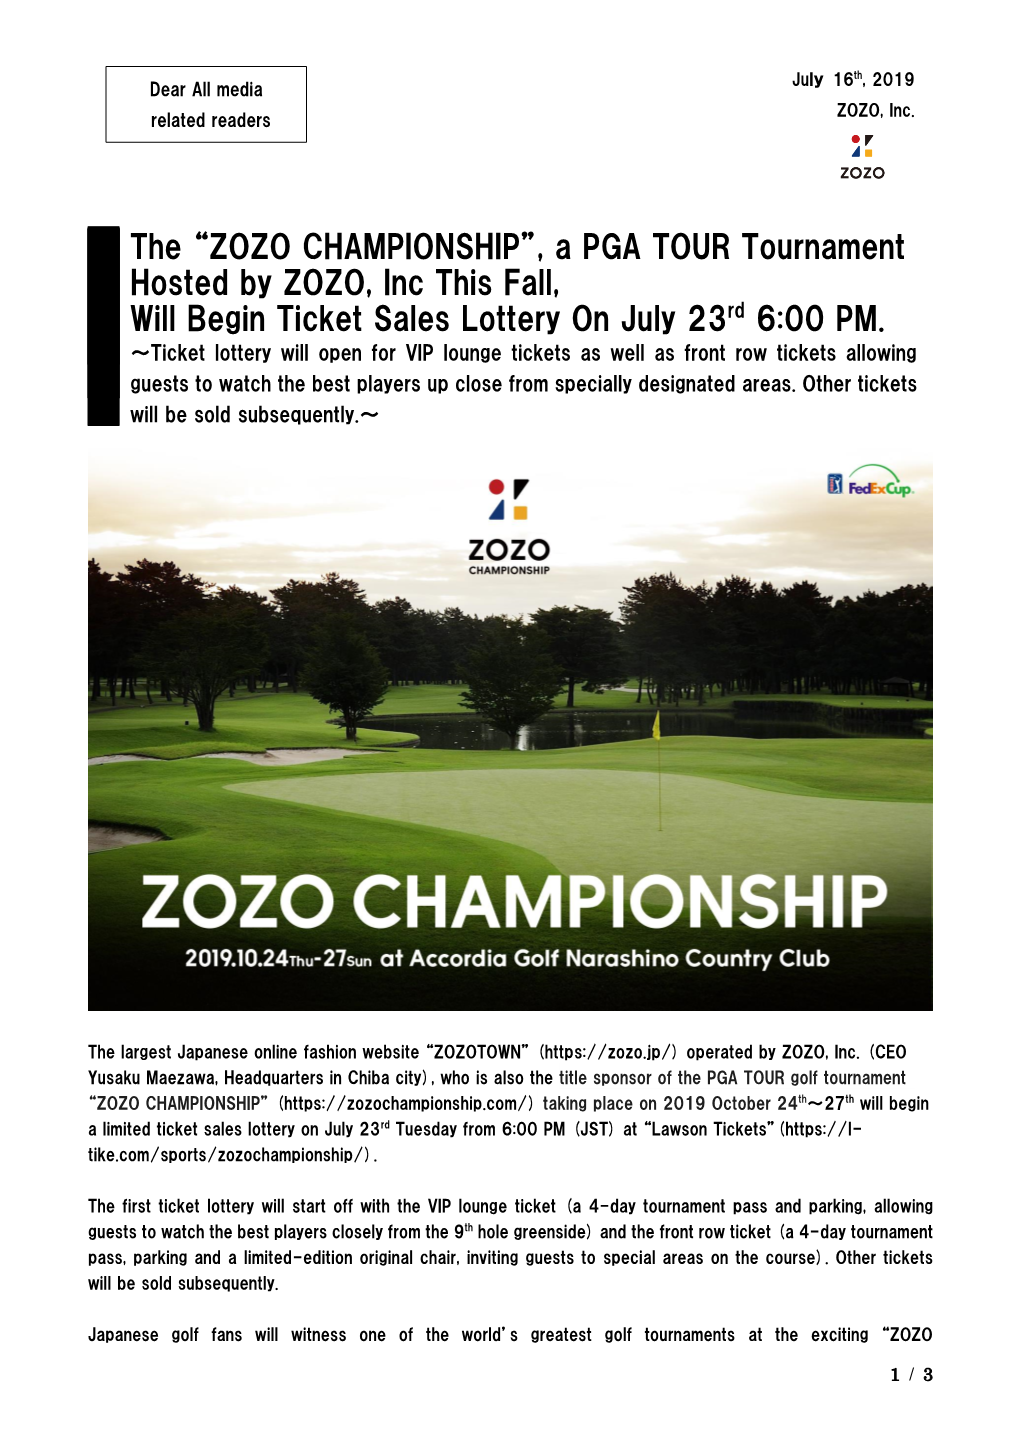 The “ZOZO CHAMPIONSHIP”, a PGA TOUR Tournament Hosted by ZOZO, Inc This Fall, Will Begin Ticket Sales Lottery on July 23Rd 6:00 PM